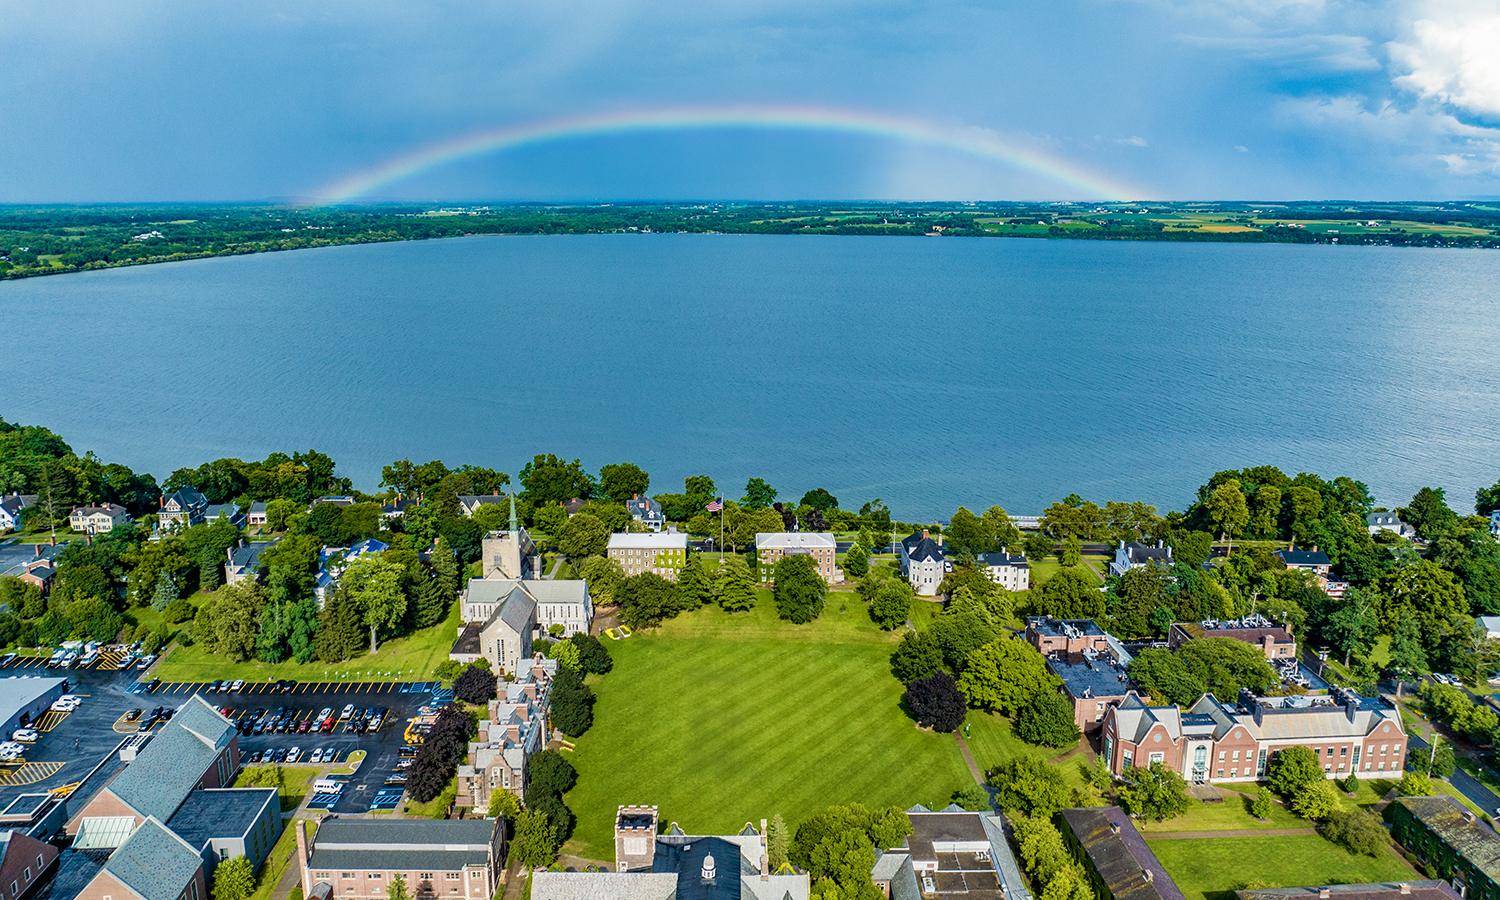 Between rainstorms on Monday, a rainbow appears on the east side of Seneca Lake.